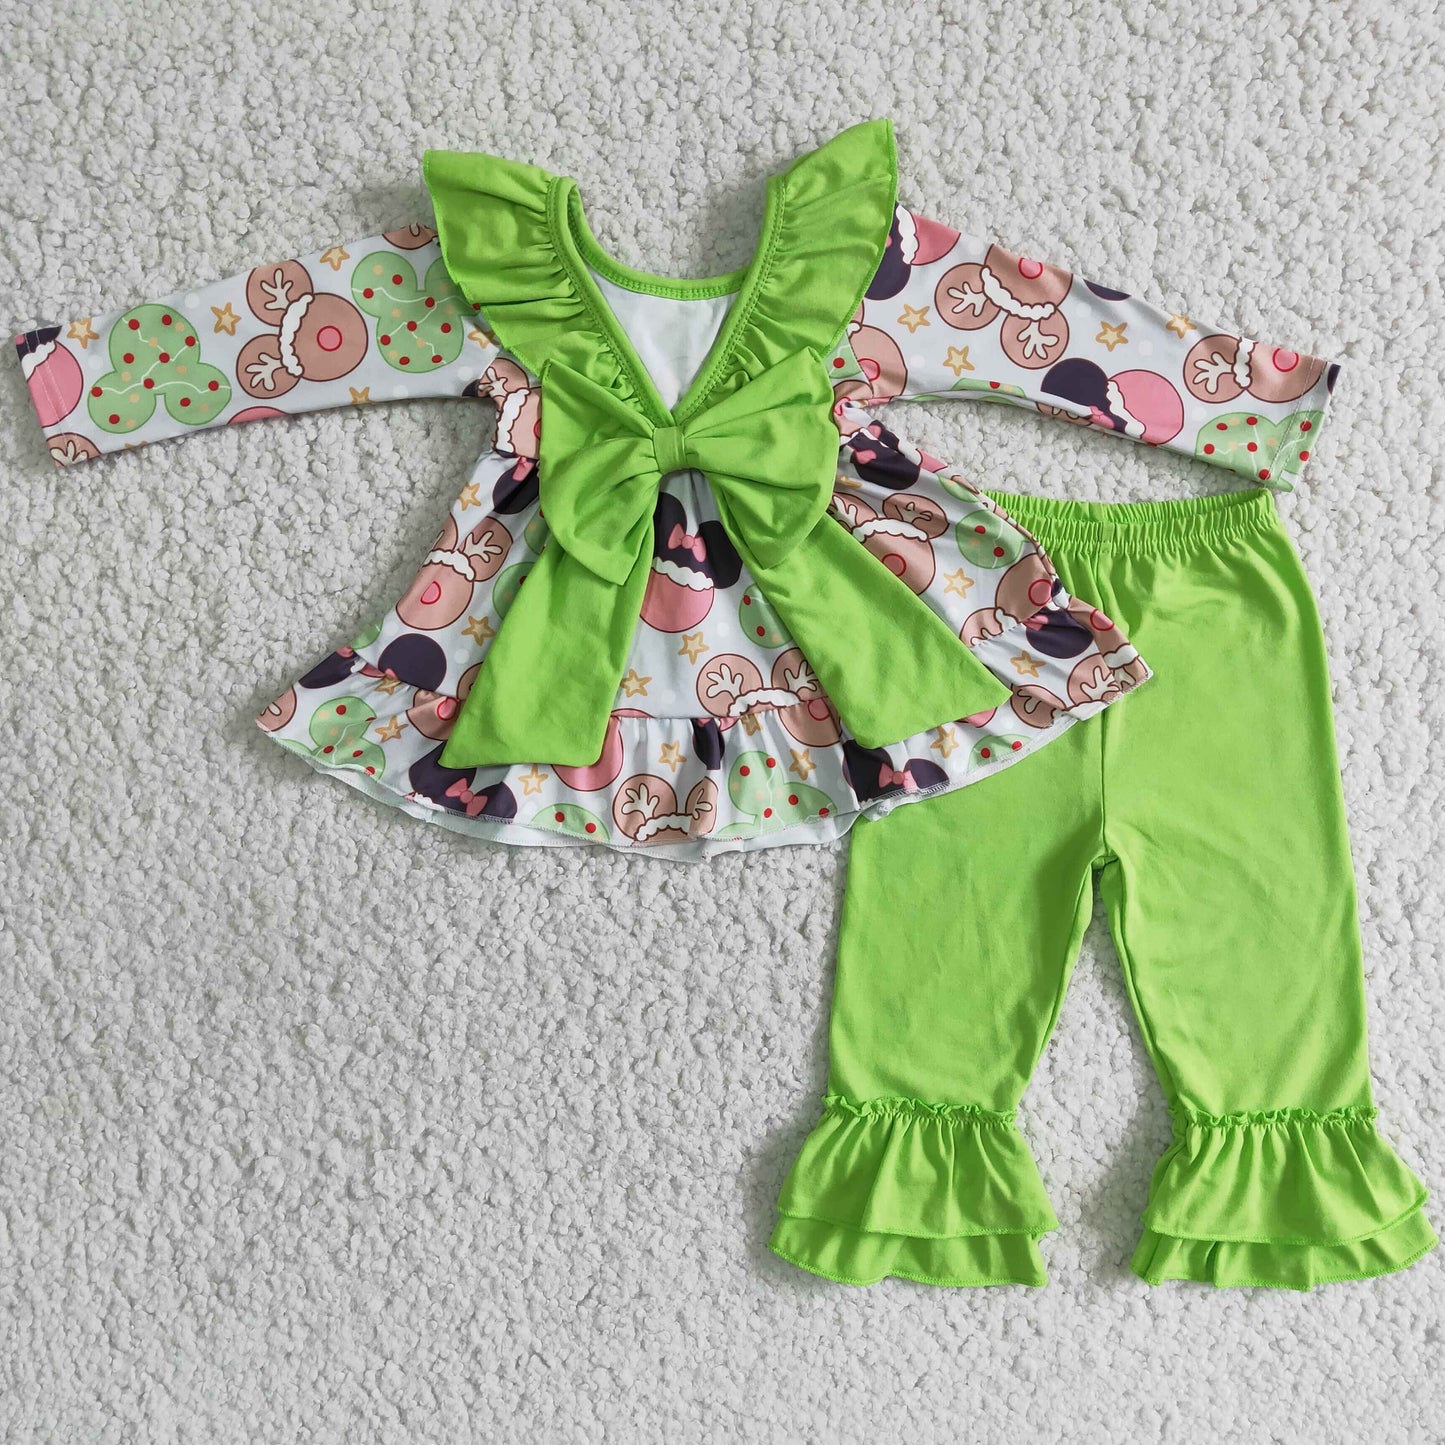 6 B2-40 Mickey bow top green pants suit